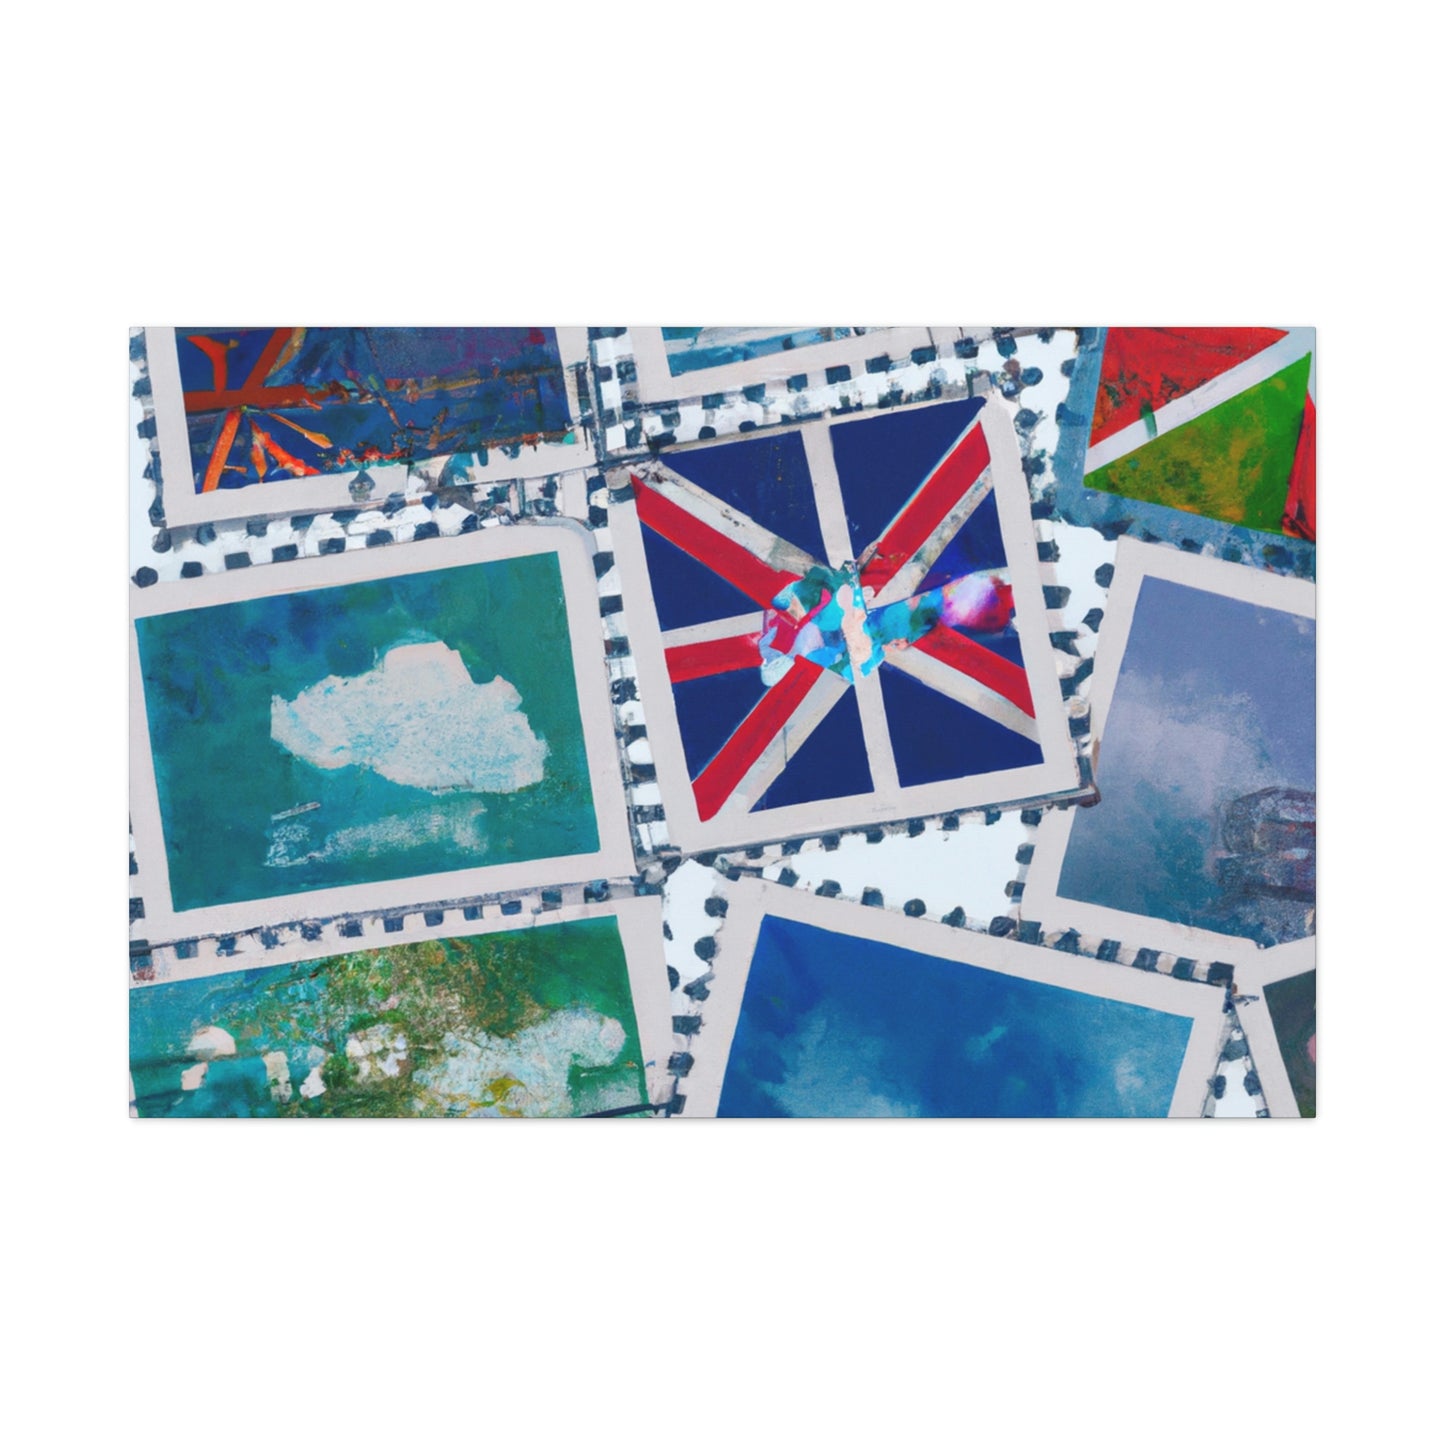 Global Souvenir Stamps - Postage Stamp Collector Canvas Wall Art